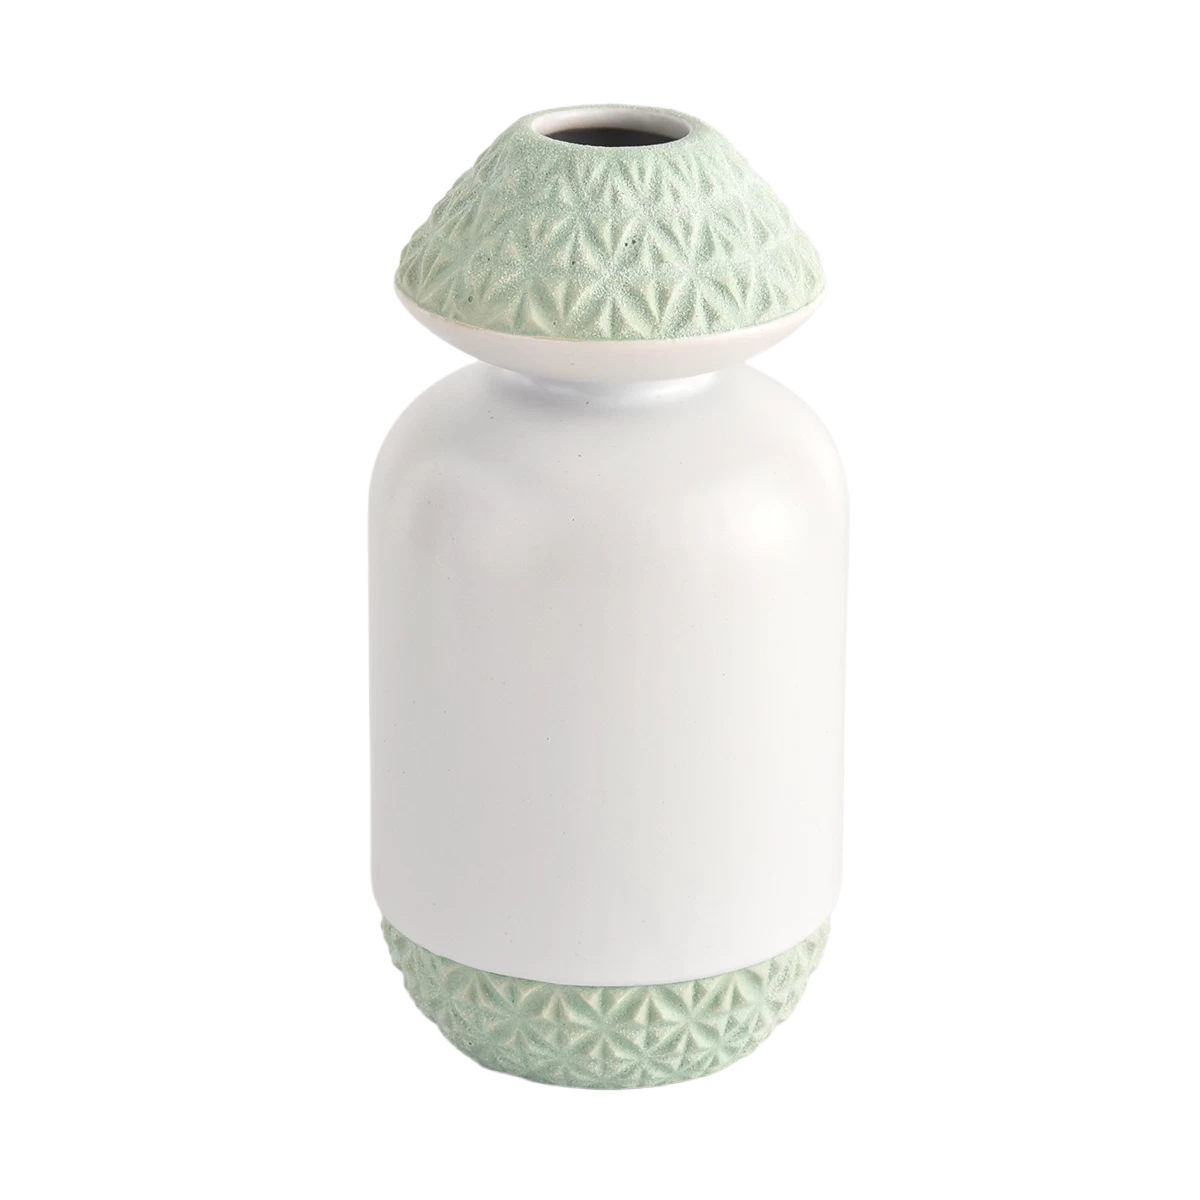 Luxury ceramic reed diffuser bottles empty for home decor